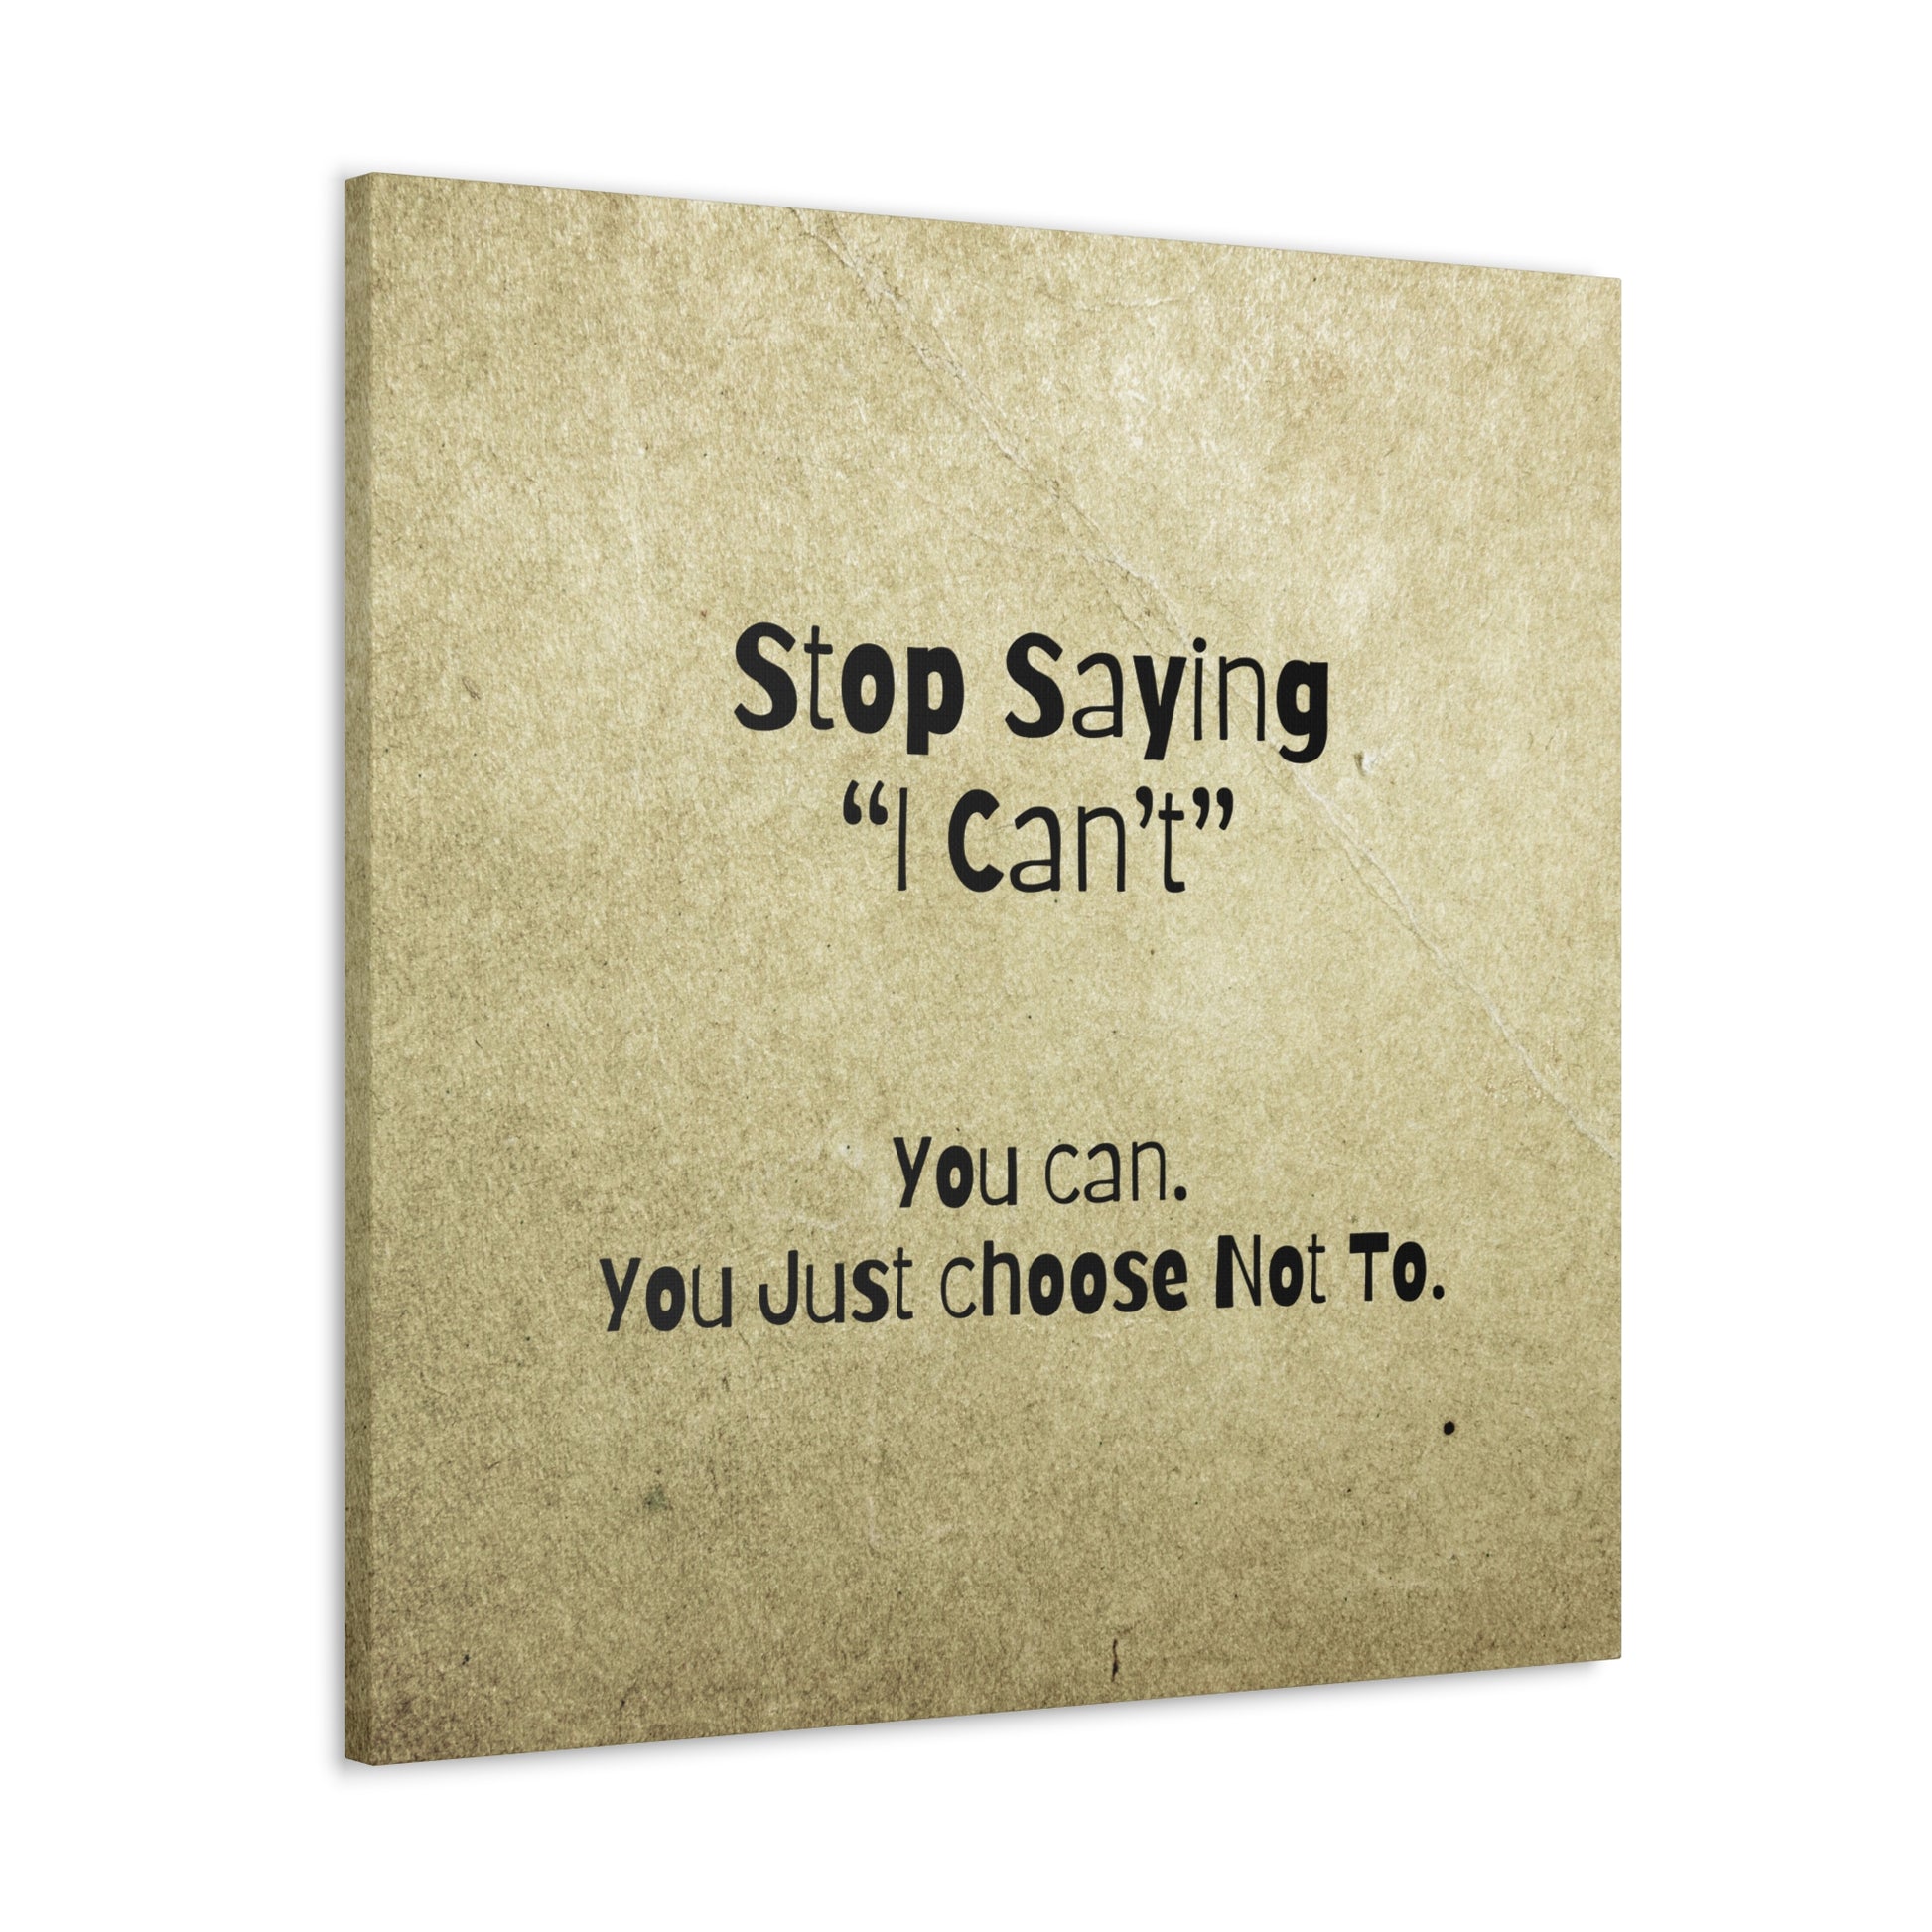 "Stop Saying I Can't" Wall Art - Weave Got Gifts - Unique Gifts You Won’t Find Anywhere Else!